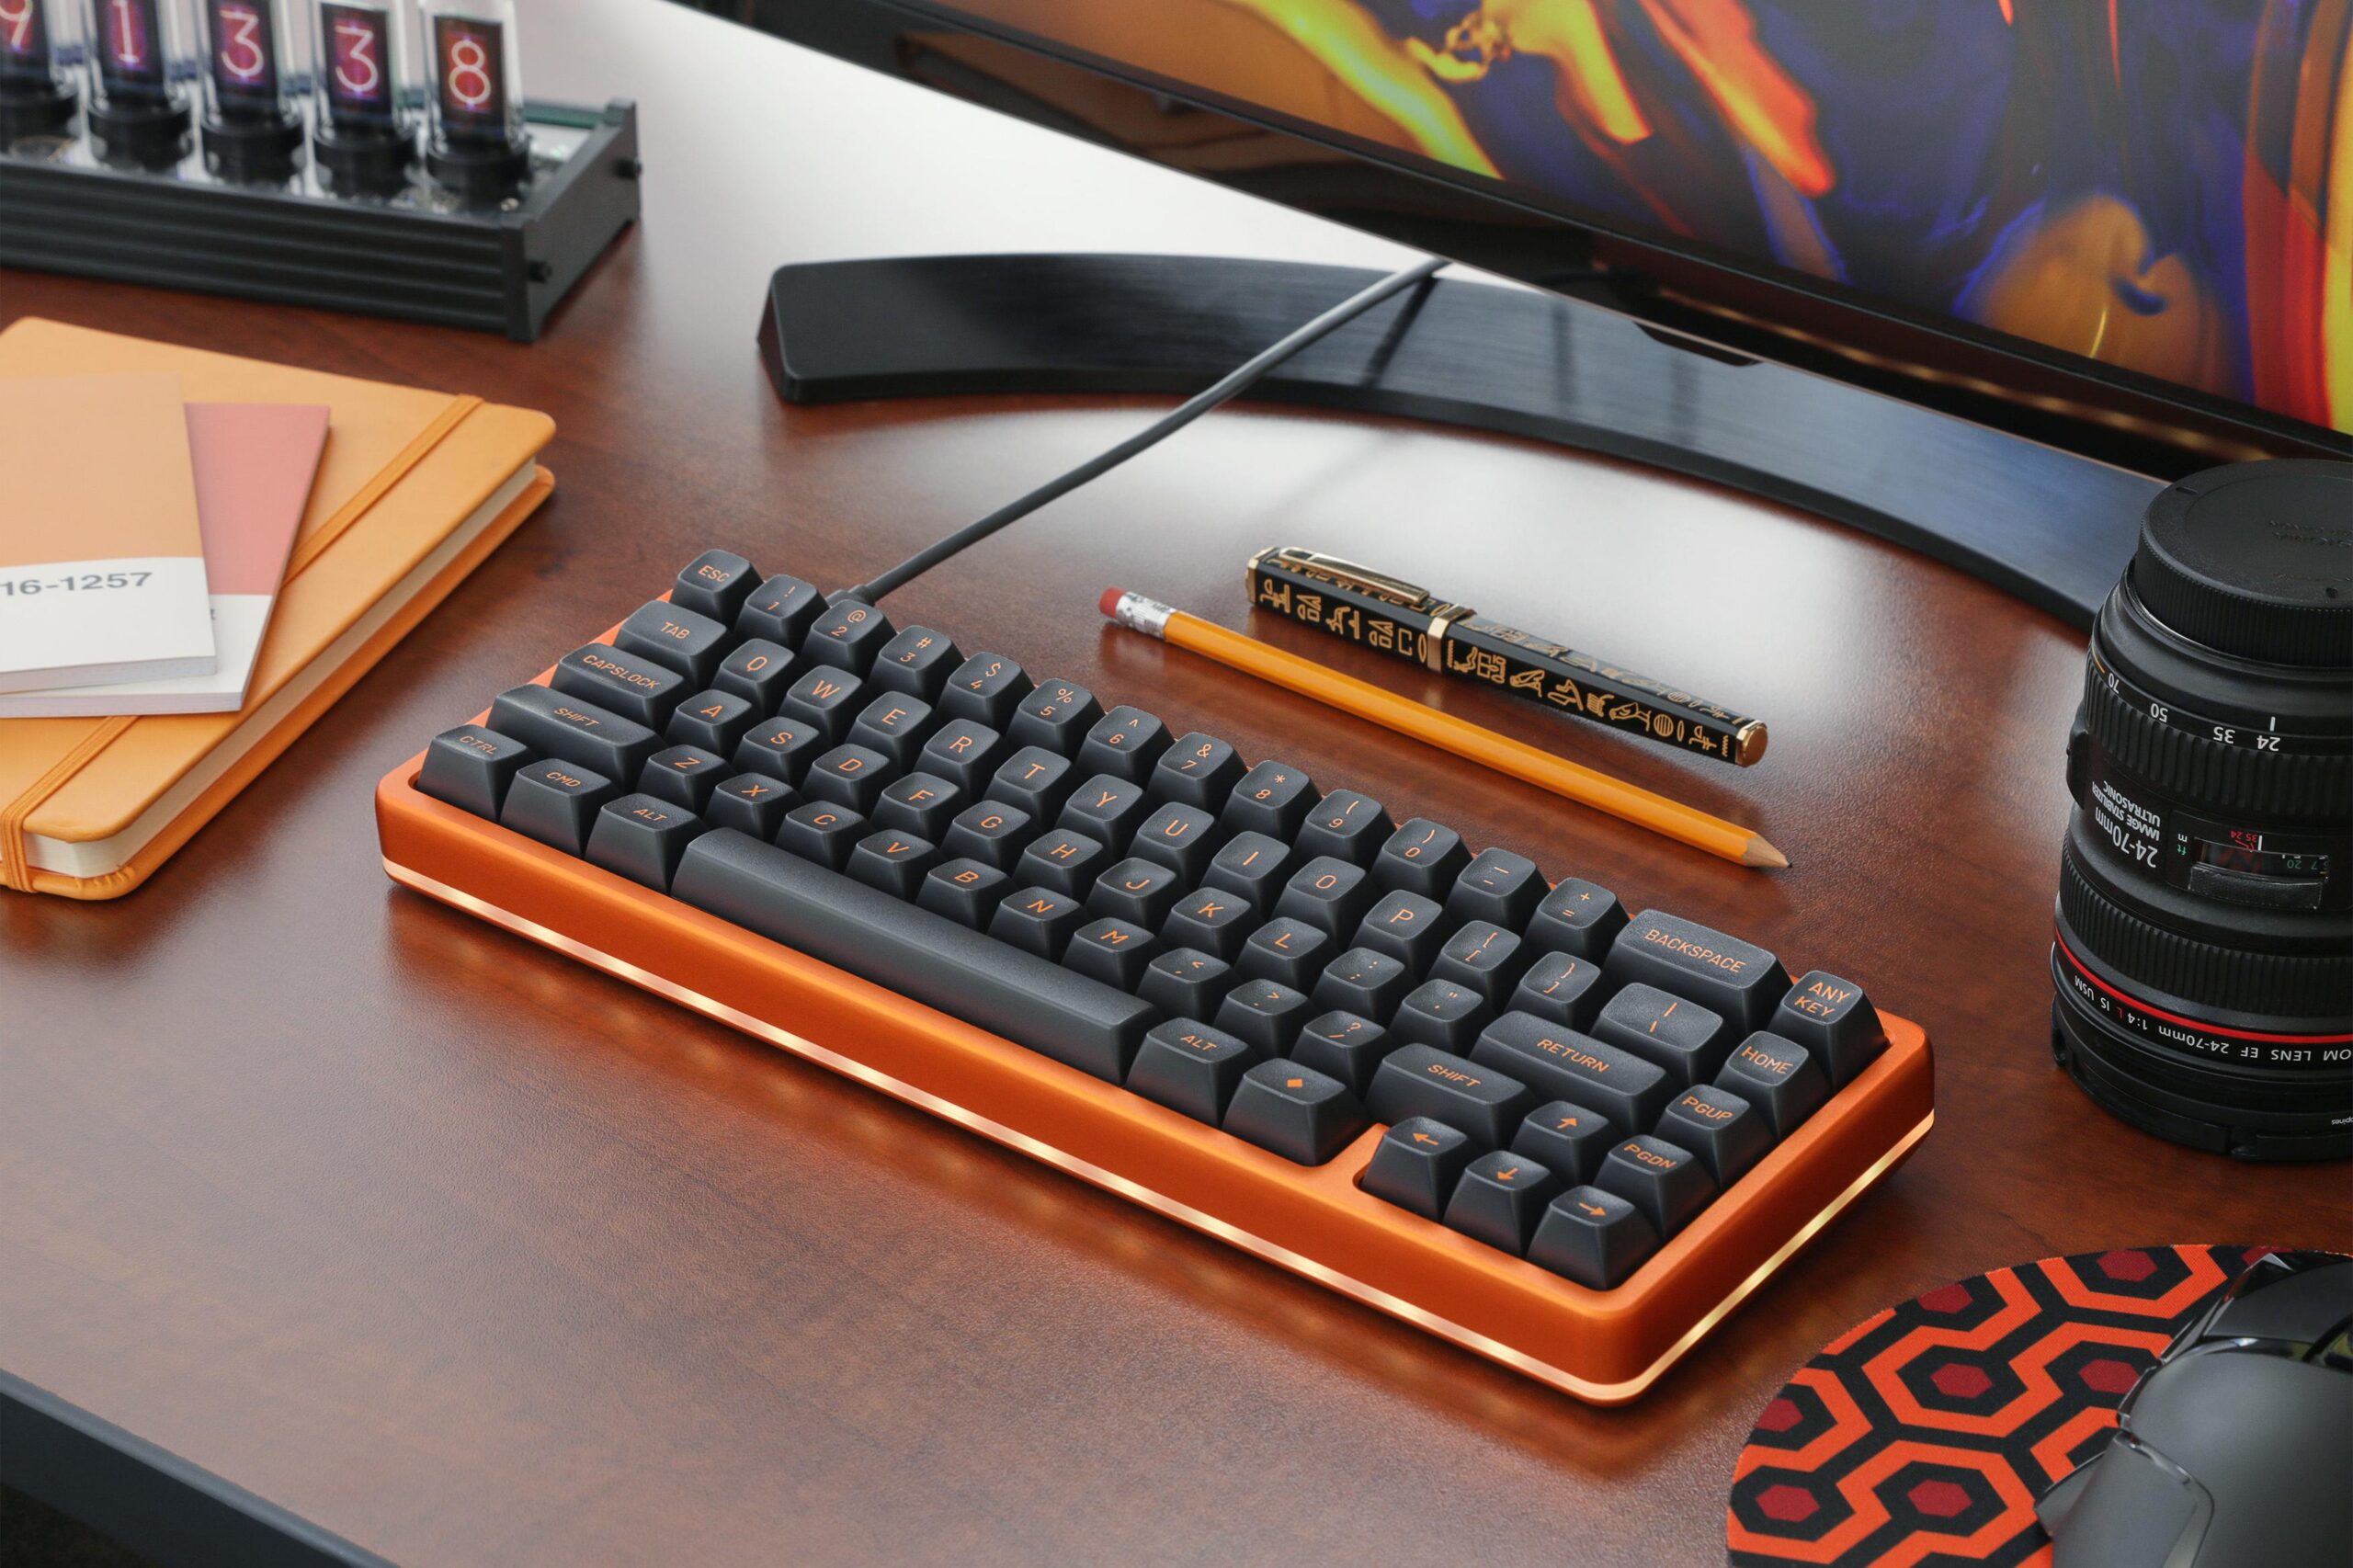 Orange case keyboard with black keycaps with orange lettering sitting in a nice and organized desk